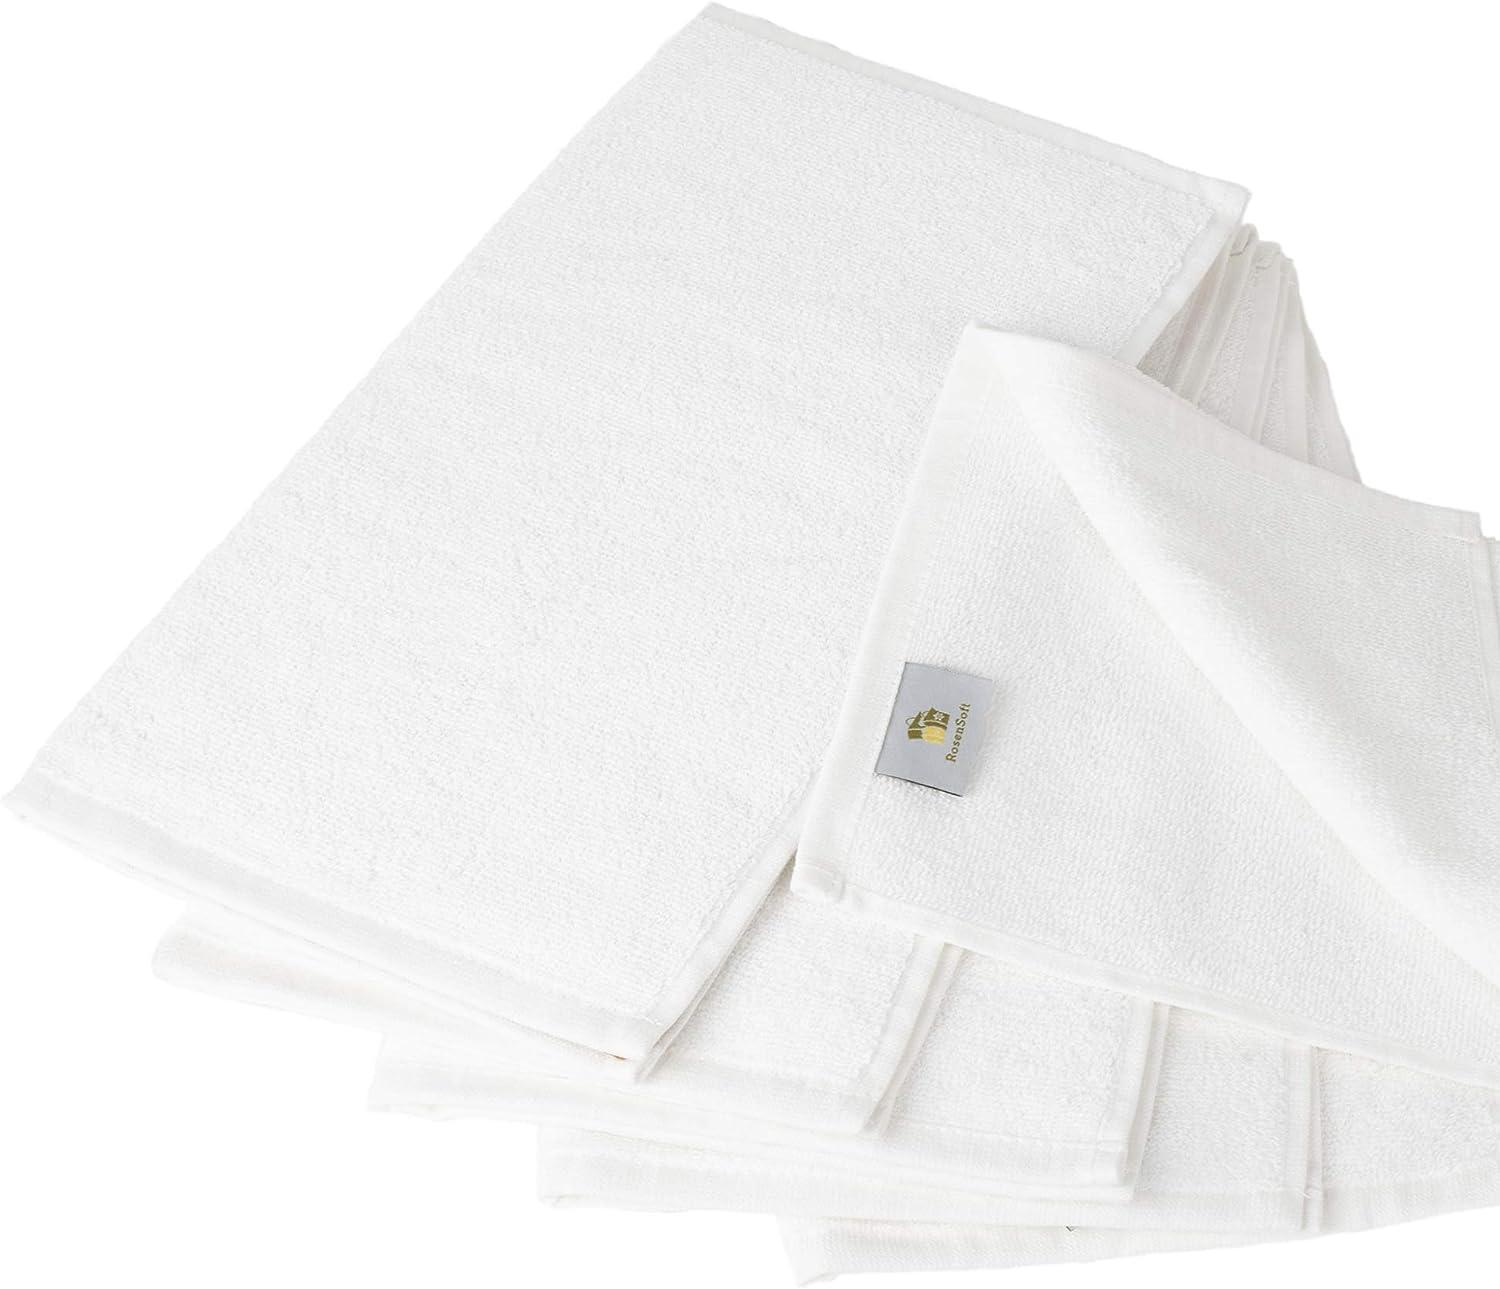 RosenSoft Oversized Wash Clothes-16x14 in Extra Large Wash Cloths for Body  and Face Hand Gym Spa- Fingertip Towels for Bathroom Bath Towel Set 100%  Turkish Cotton Thick and Absorbent (White 6) White